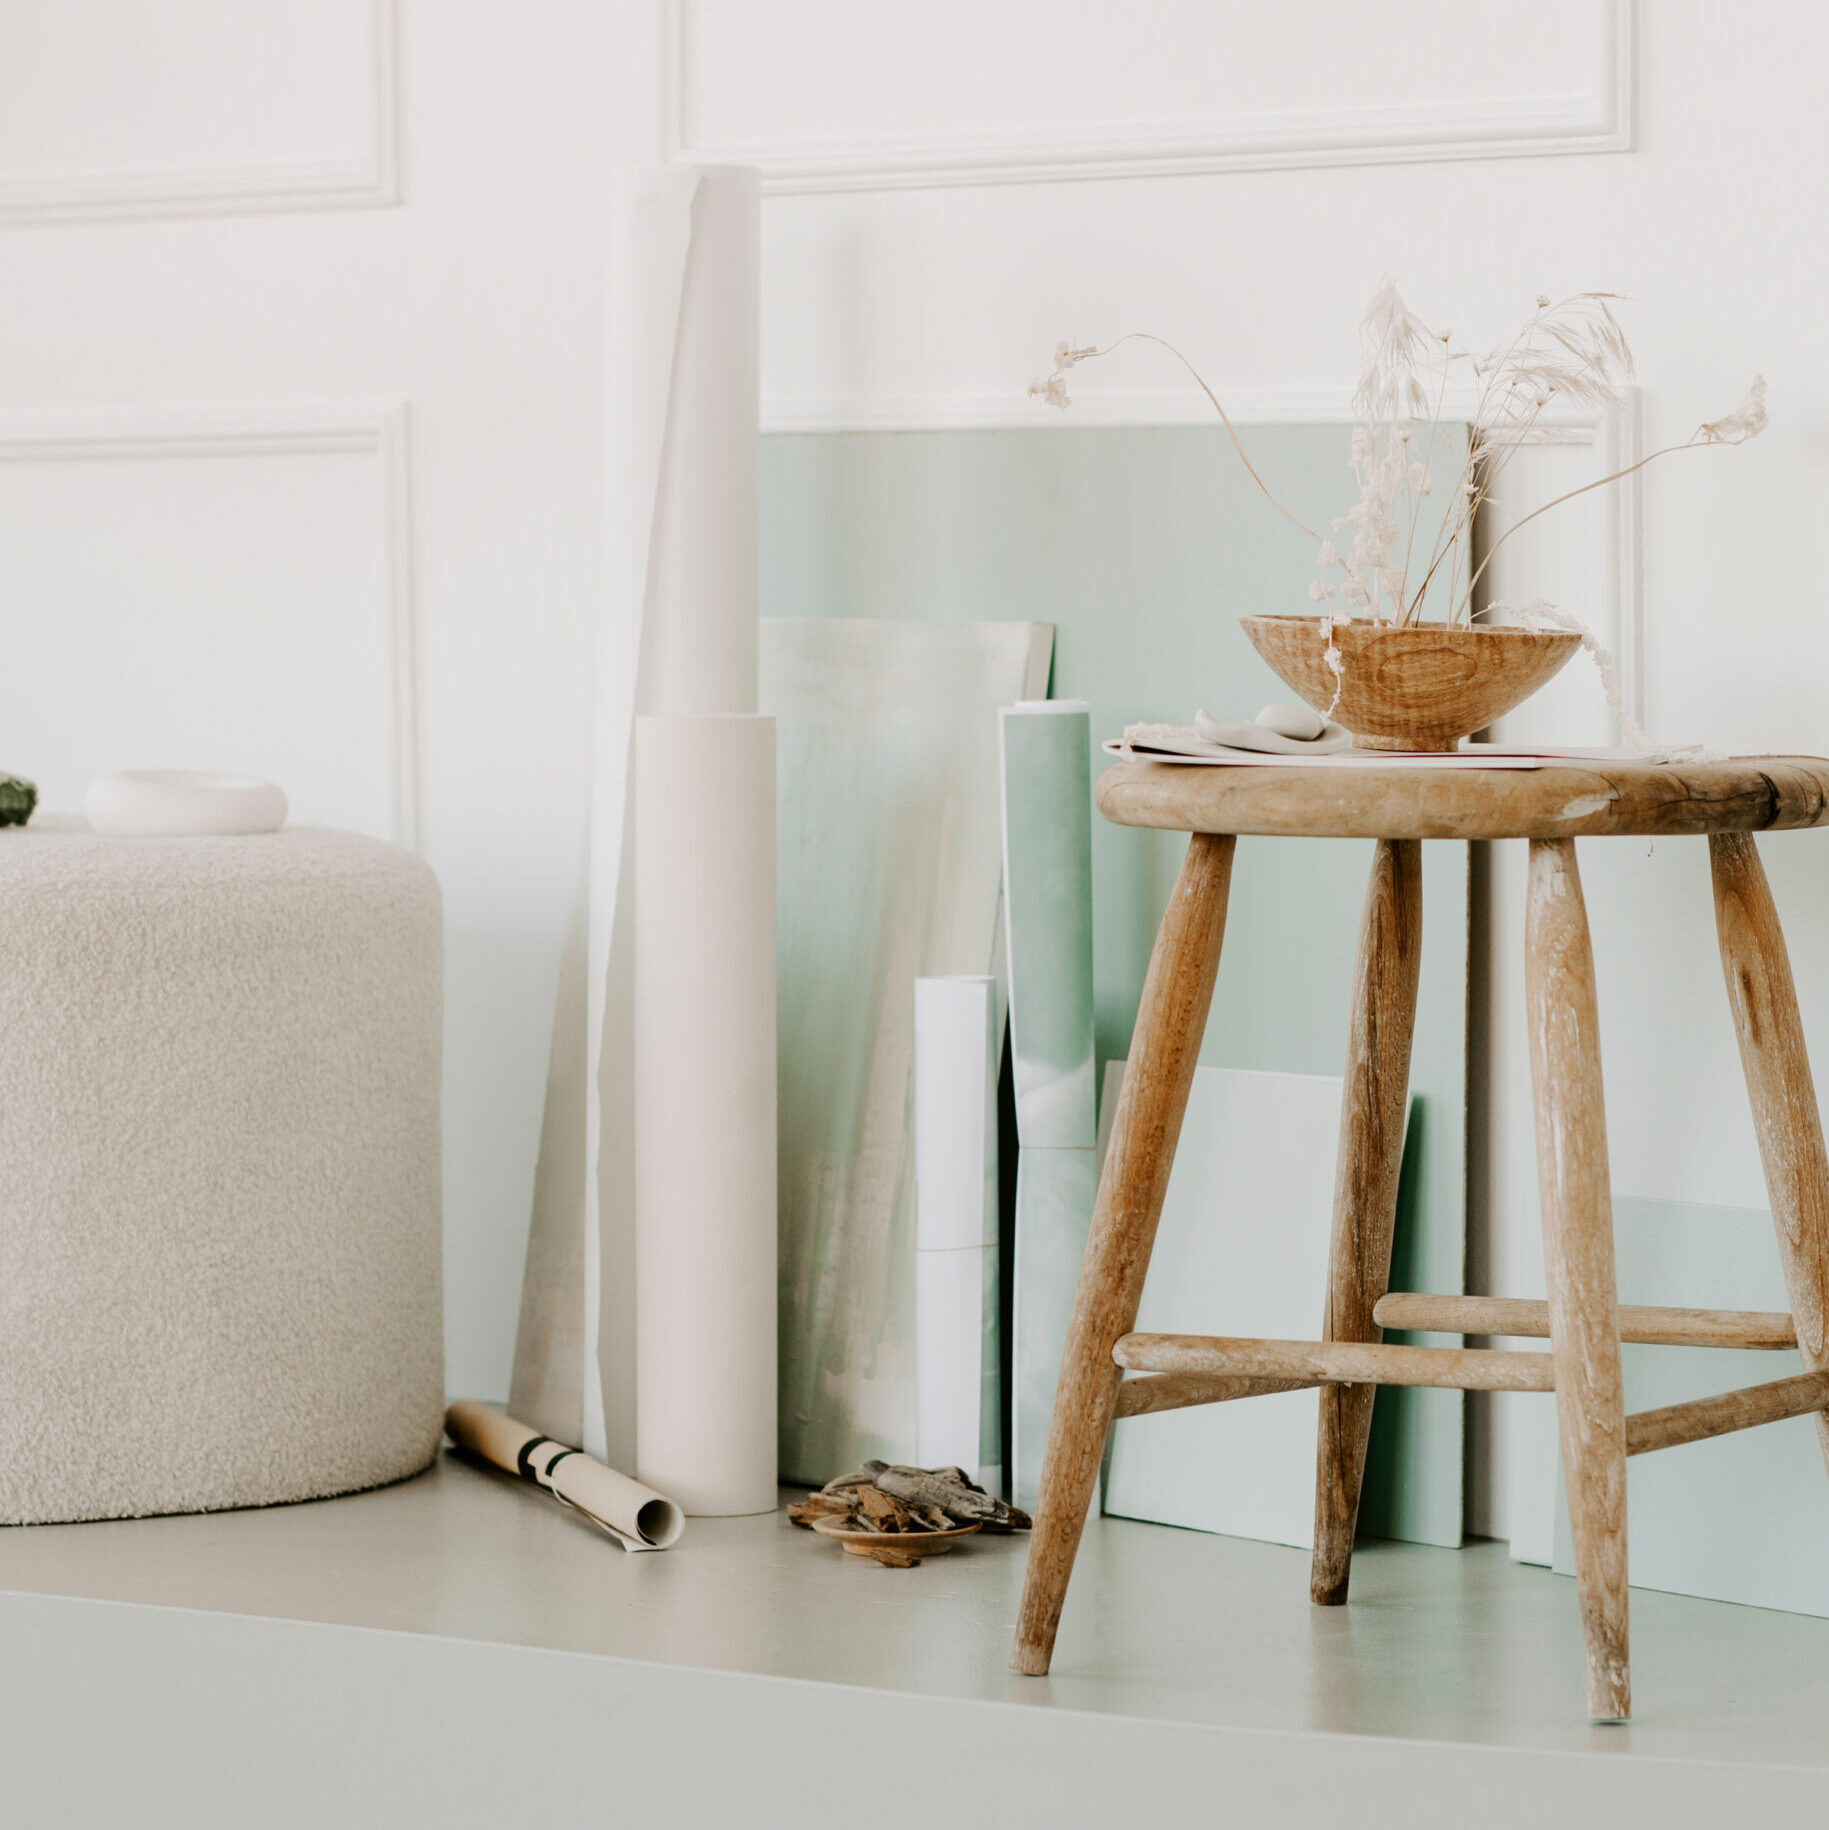 Stock photo of an artist's studio with a wooden stool and mint collared canvases.